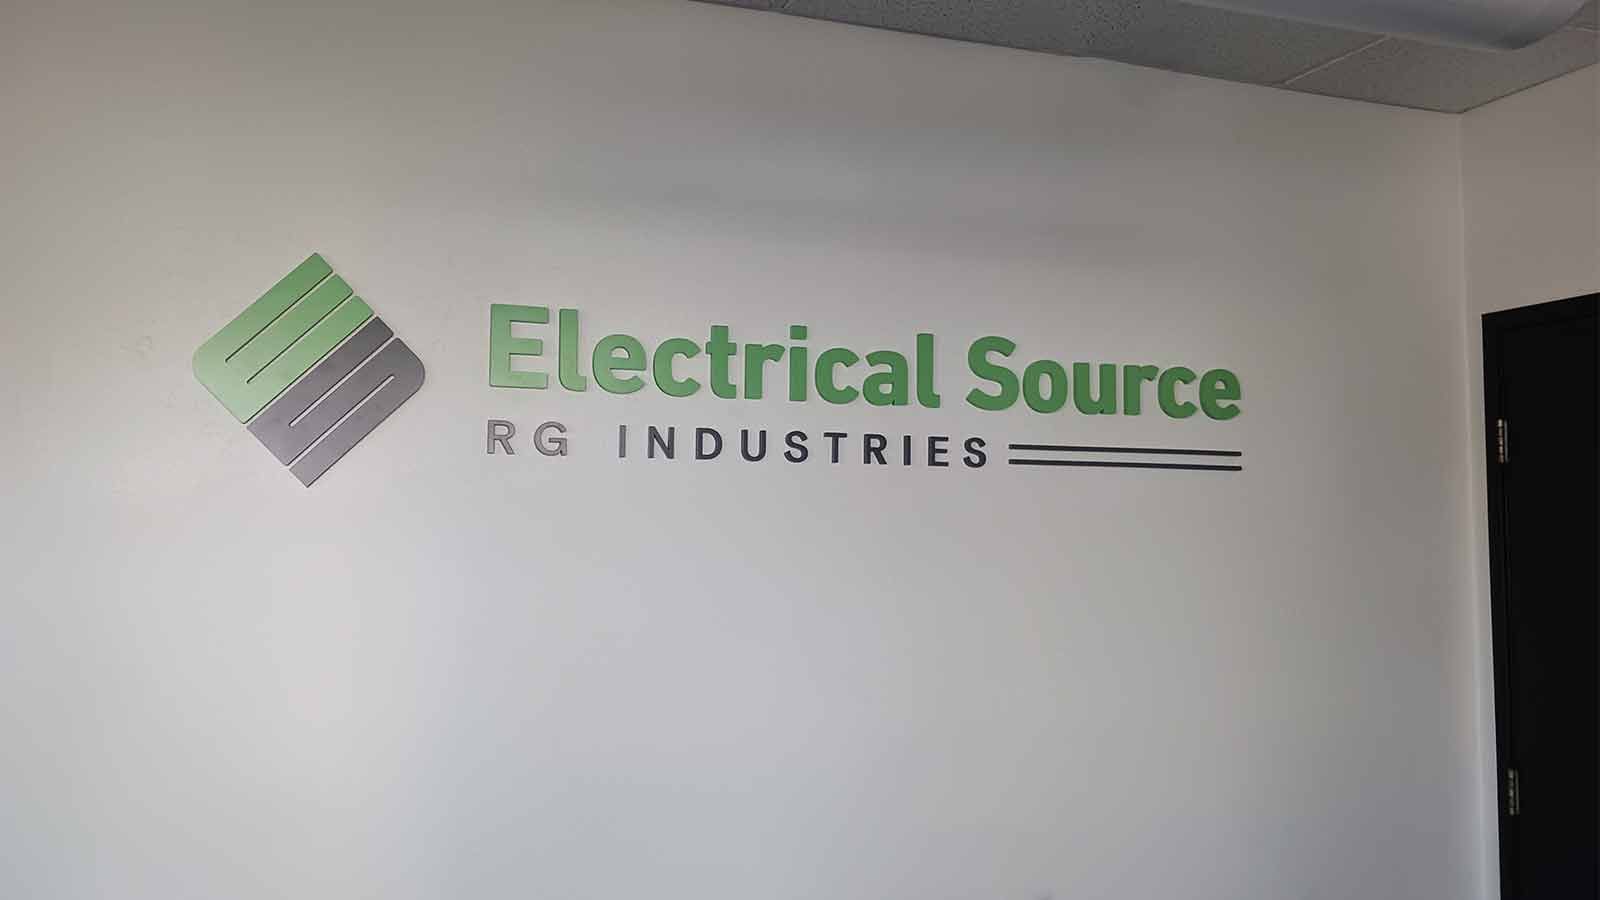 Electrical Source Holdings 3D signs attached to the wall